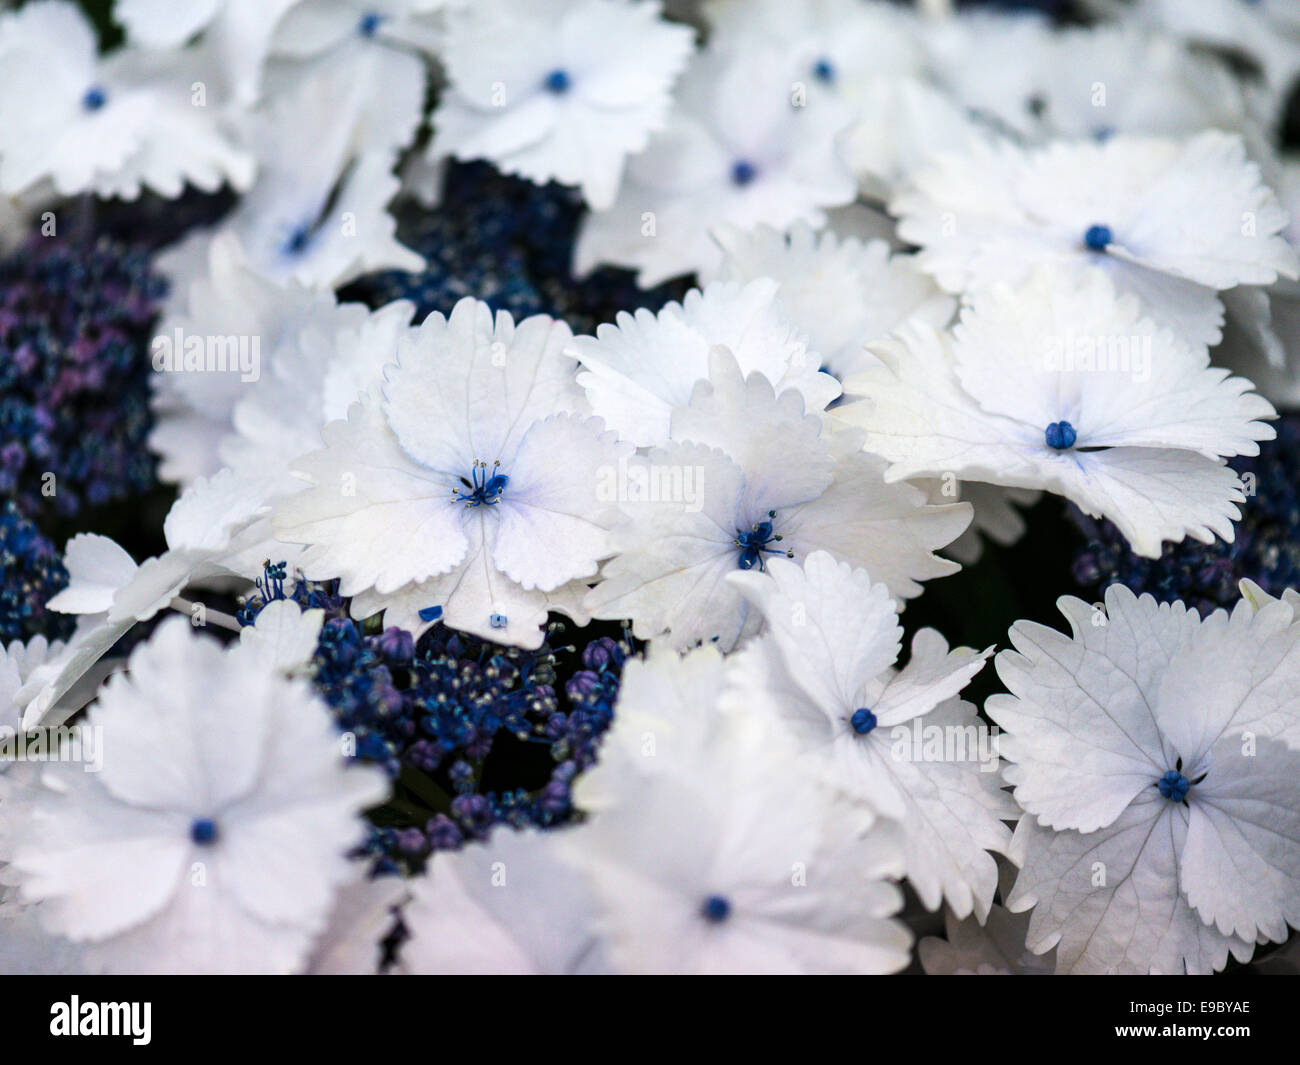 Stunning Mixed display, white Streptocarpus with blue carpel and mixed blue varietal. Stock Photo